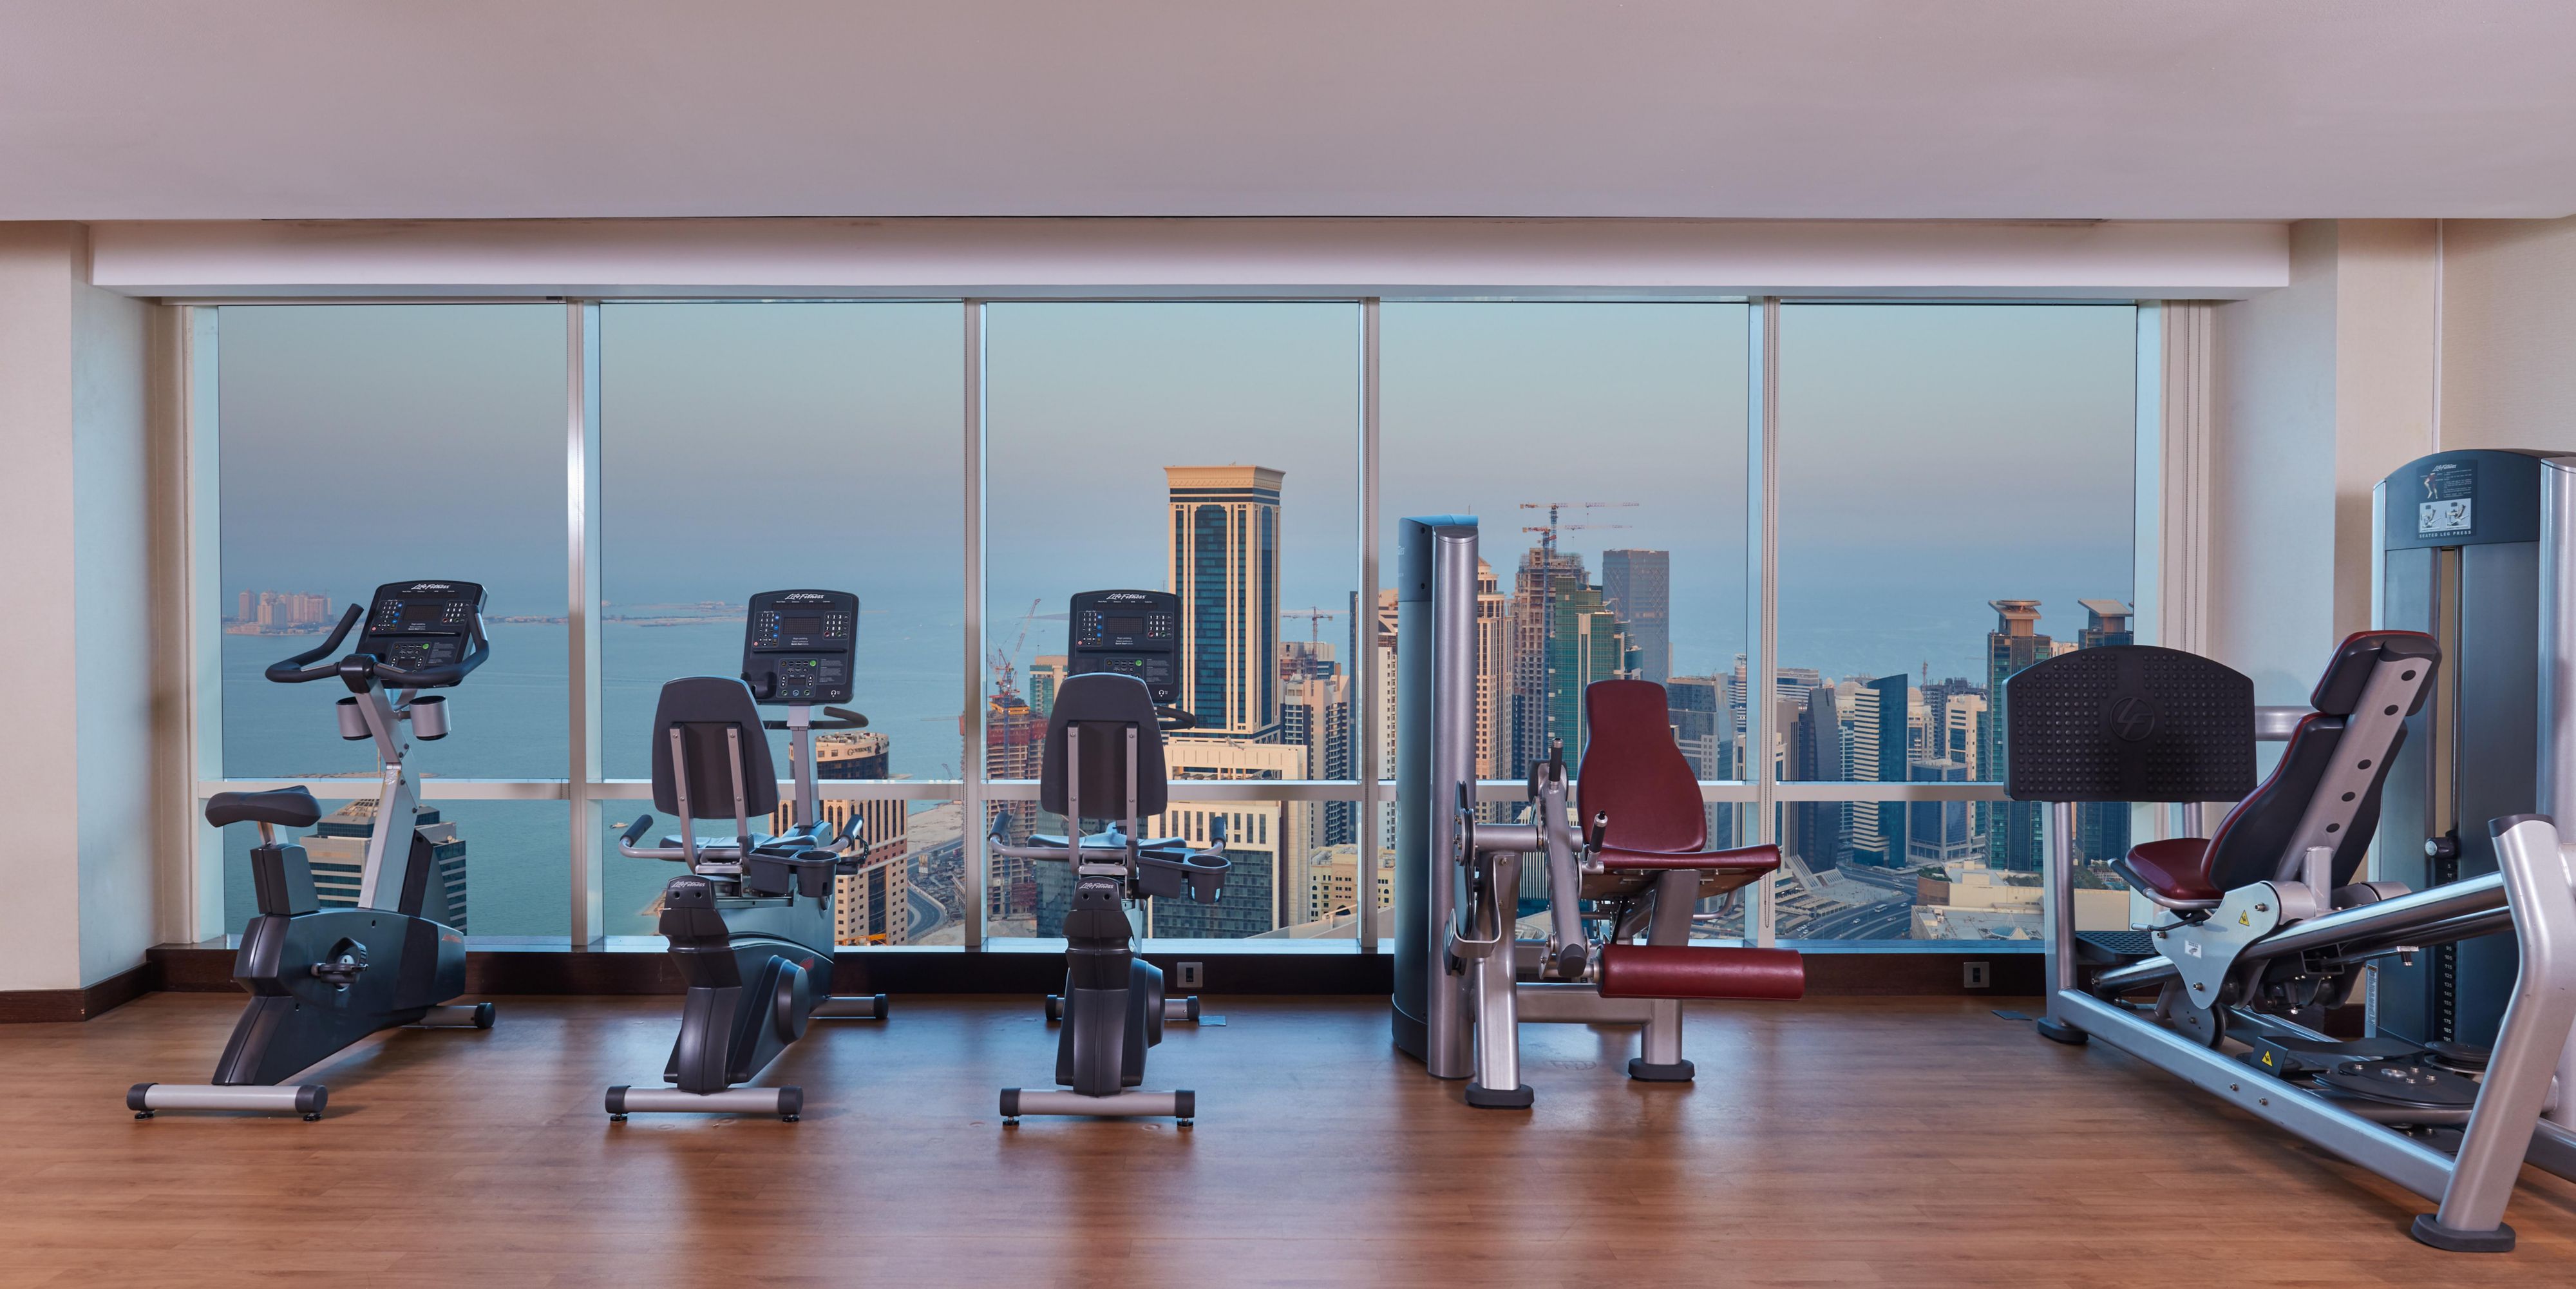 The Health & Fitness Club, located on the 46th floor, provides the latest cardiovascular equipment and plenty of space for free weights and stretching in addition to a serene space to relax with a rooftop-shaded swimming pool overlooking the dazzling cityscape.